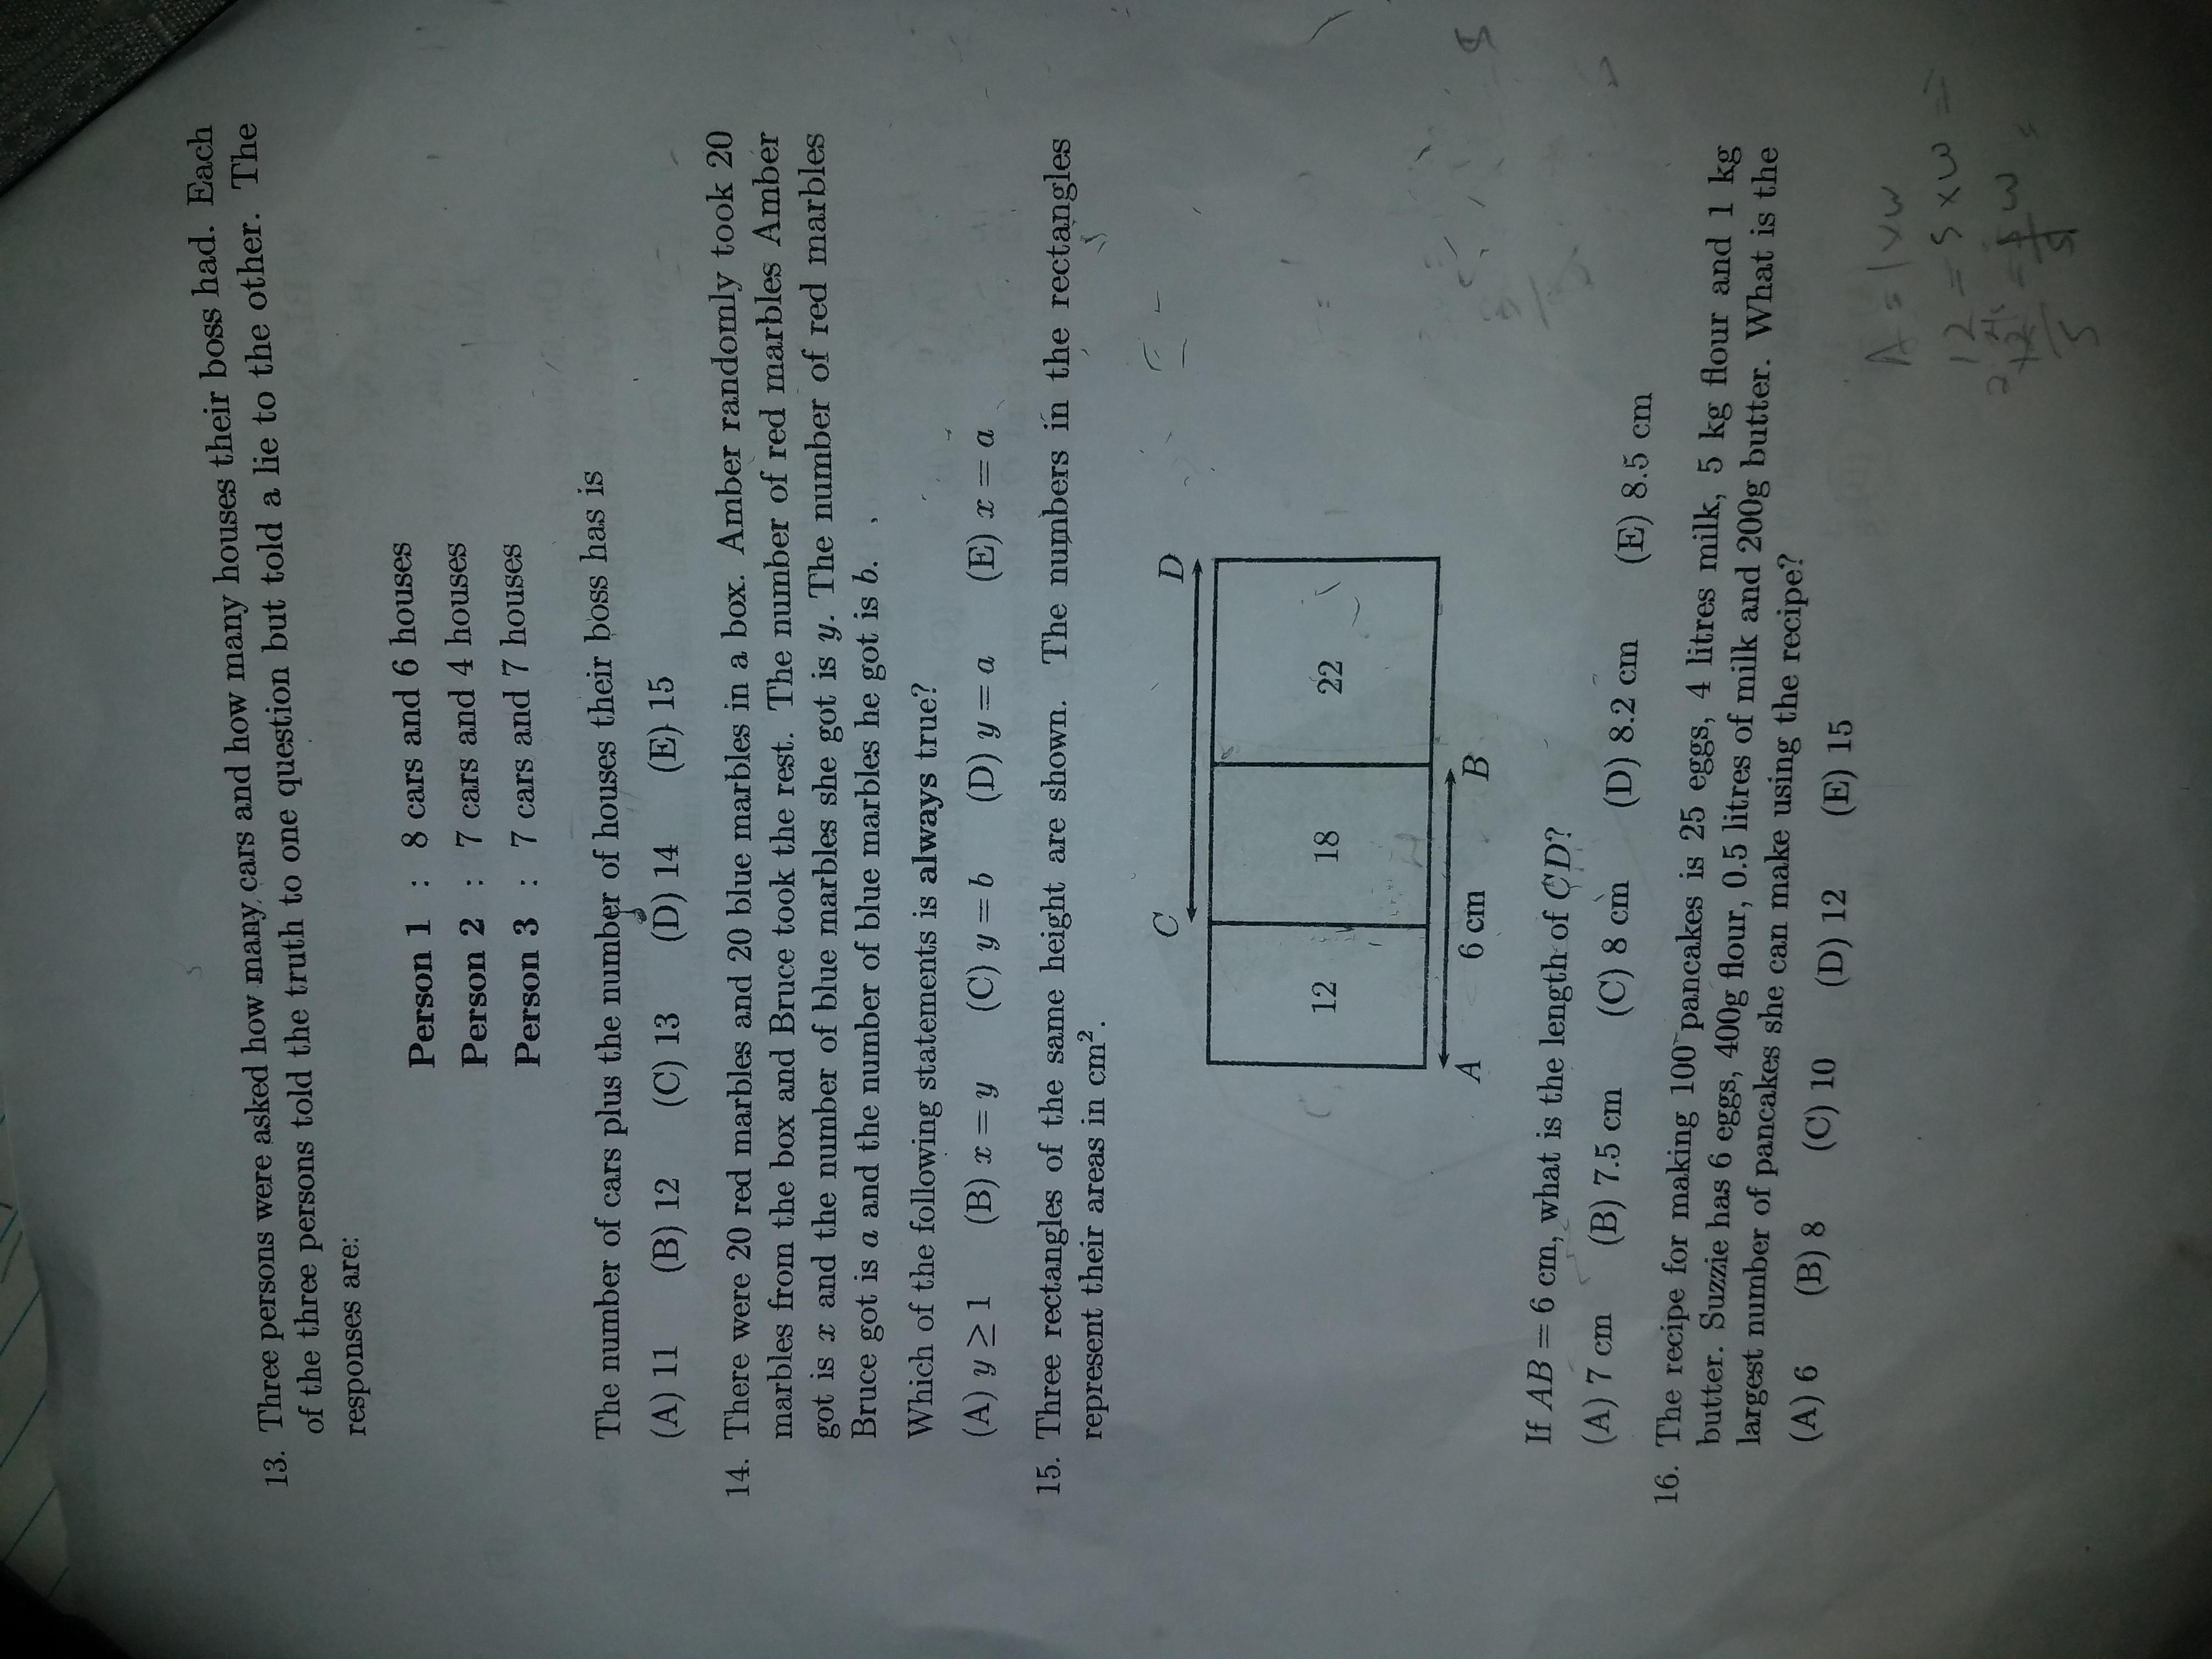 Can You Please Help Me From Number 13 To 16?